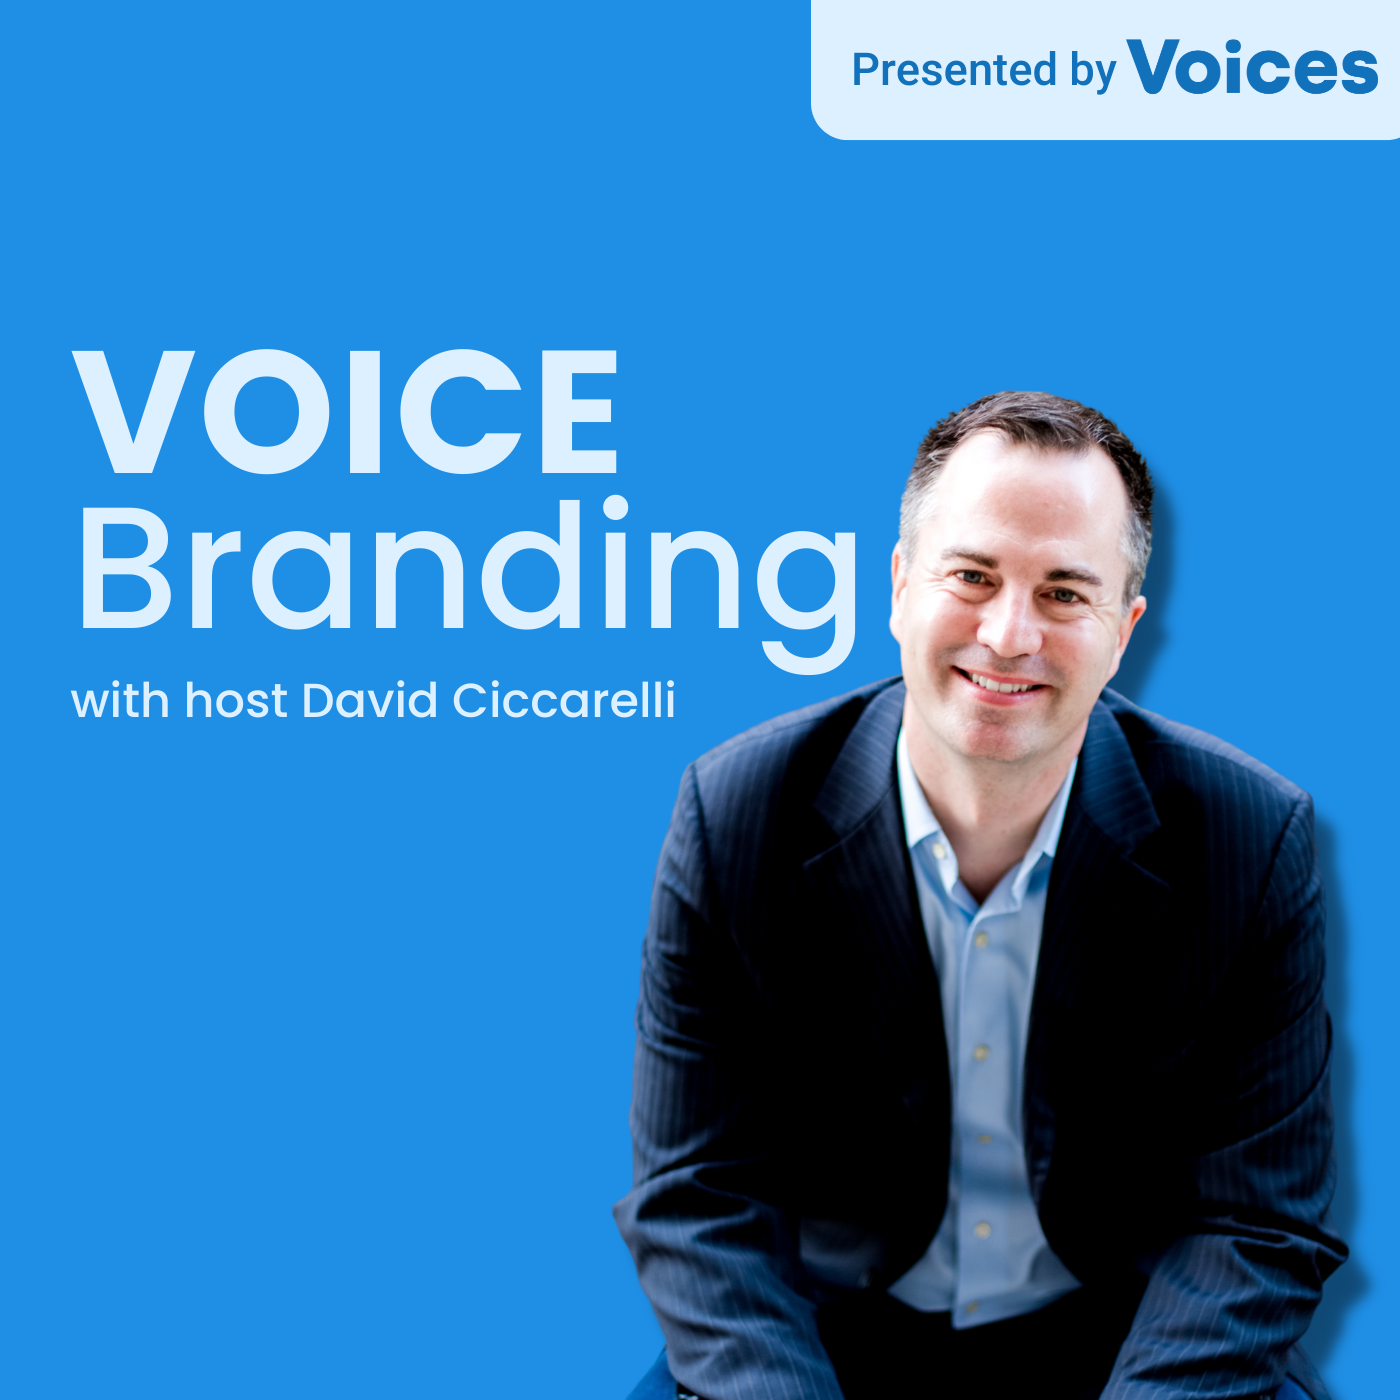 New ‘Voice Branding’ Podcast by Voices is now live.